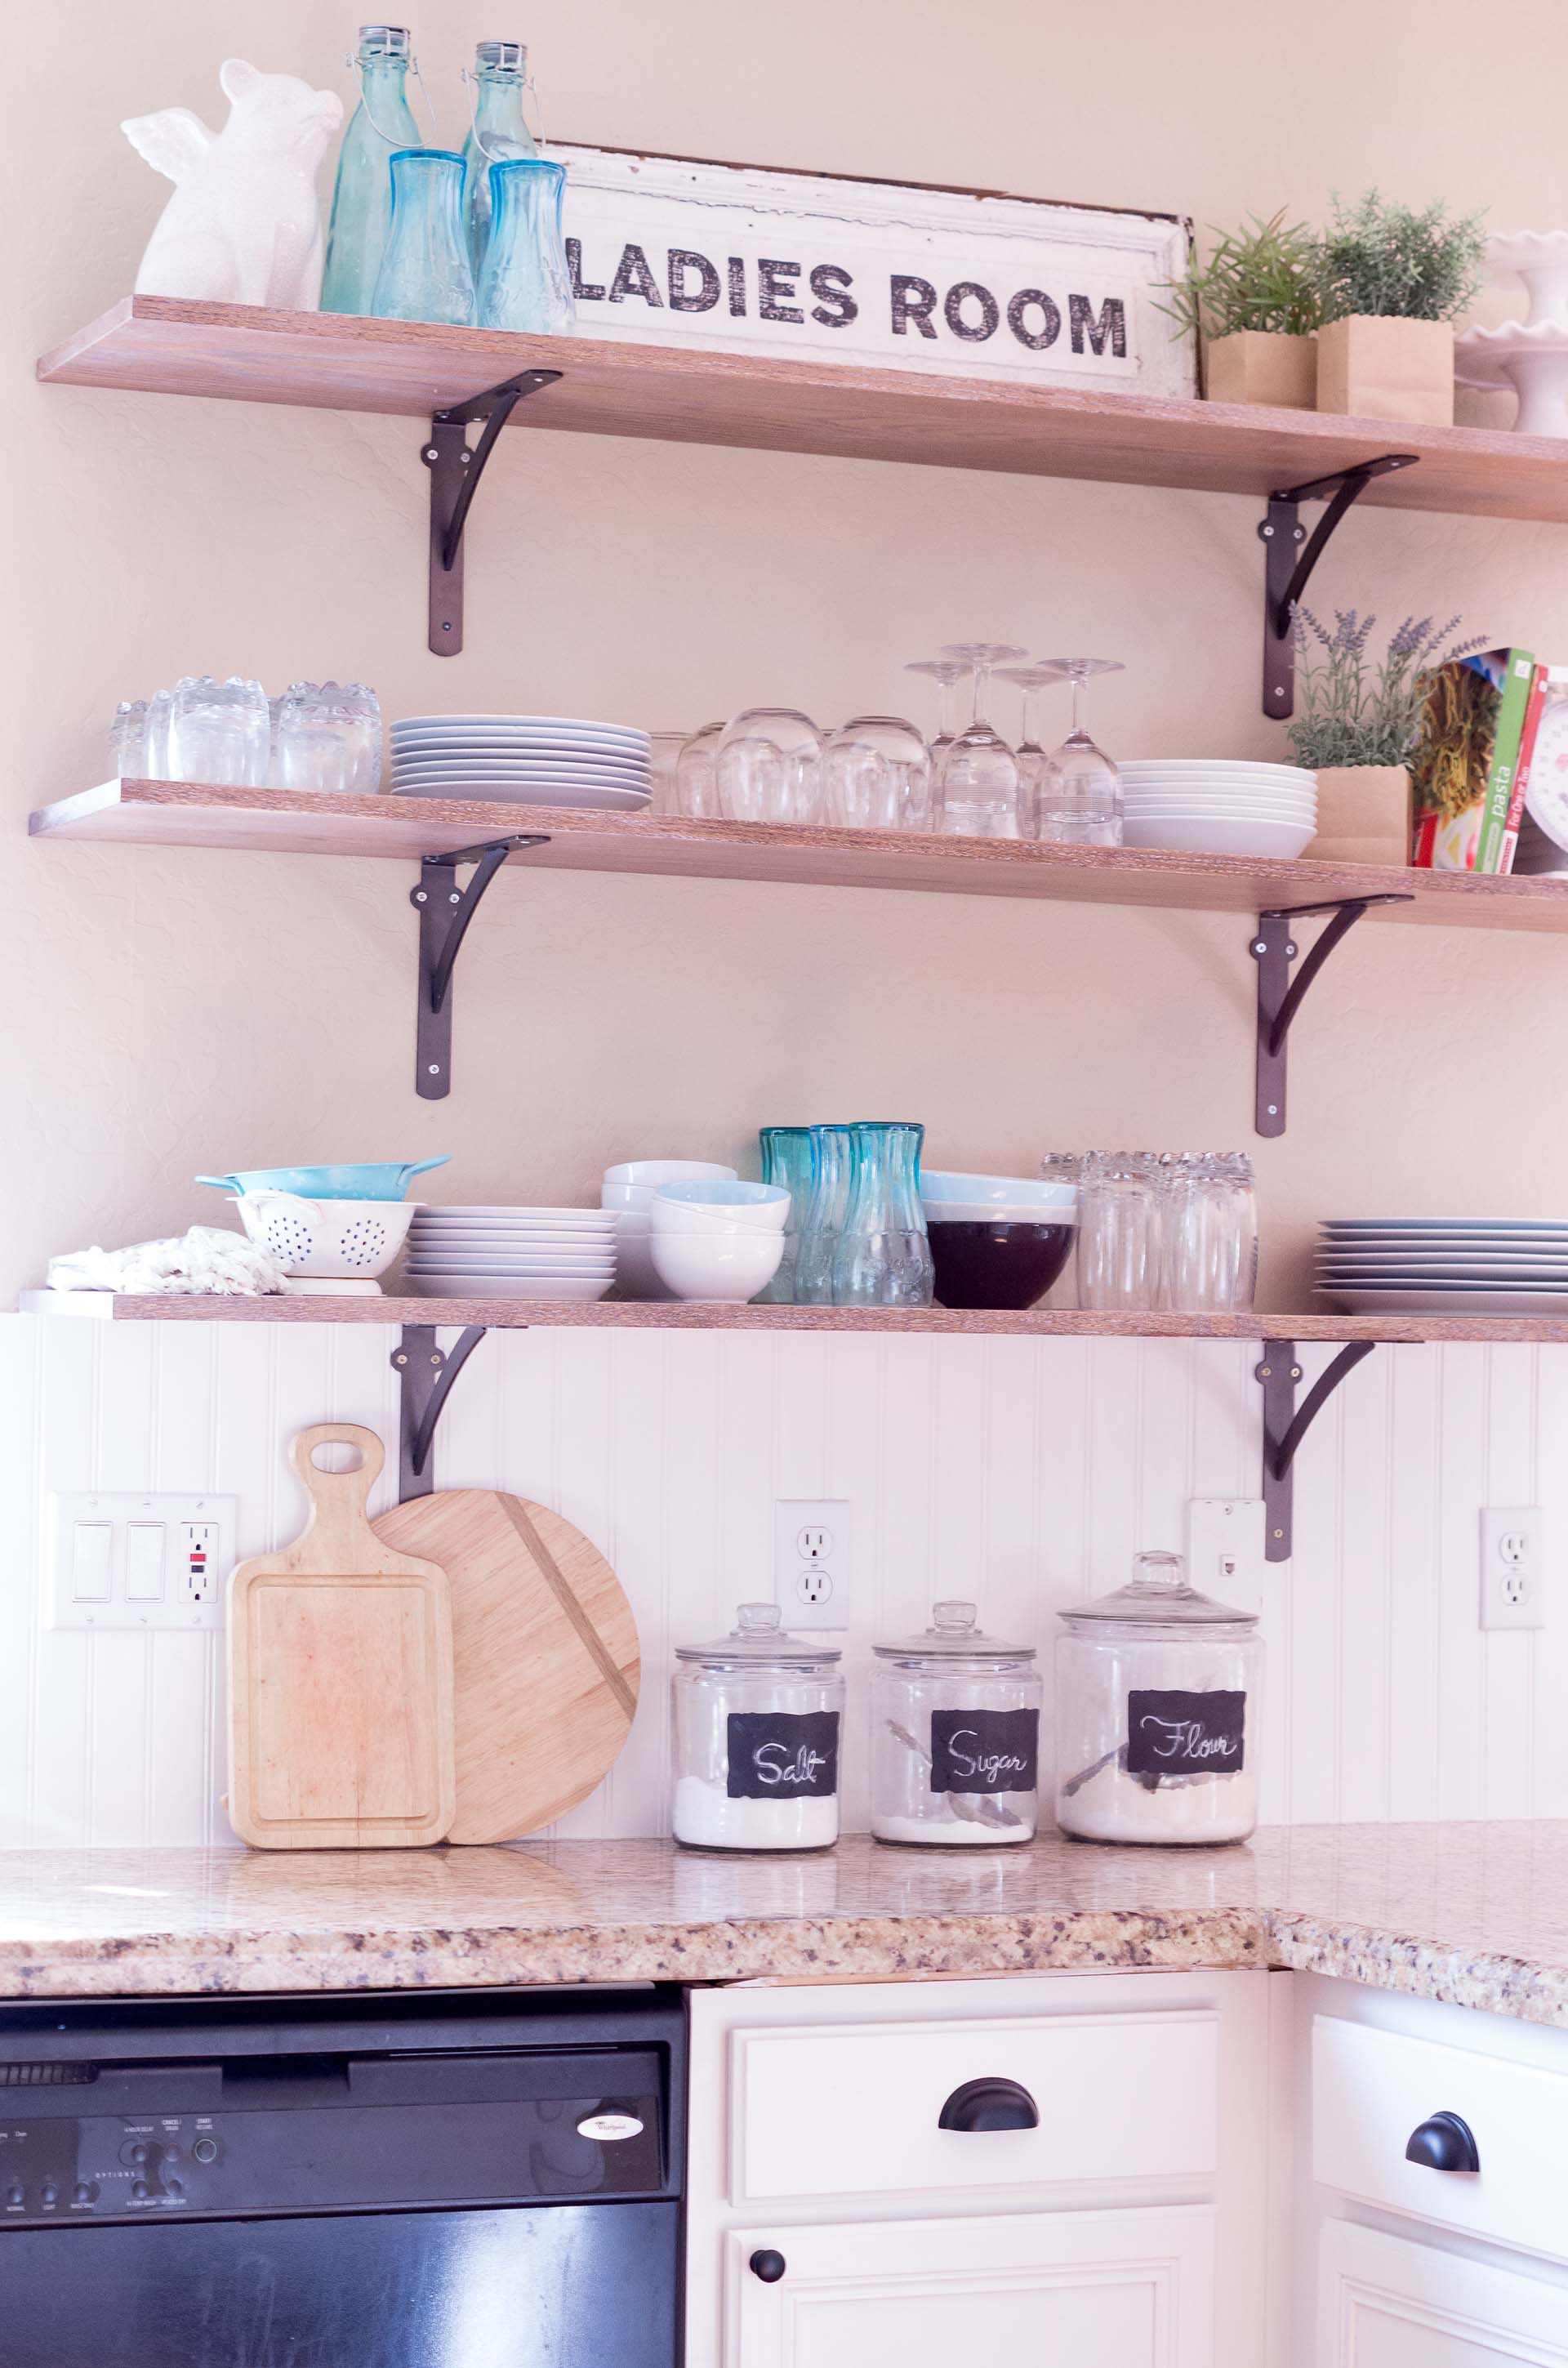 Keep Tidier And More Organized With These Fresh Kitchen Shelves